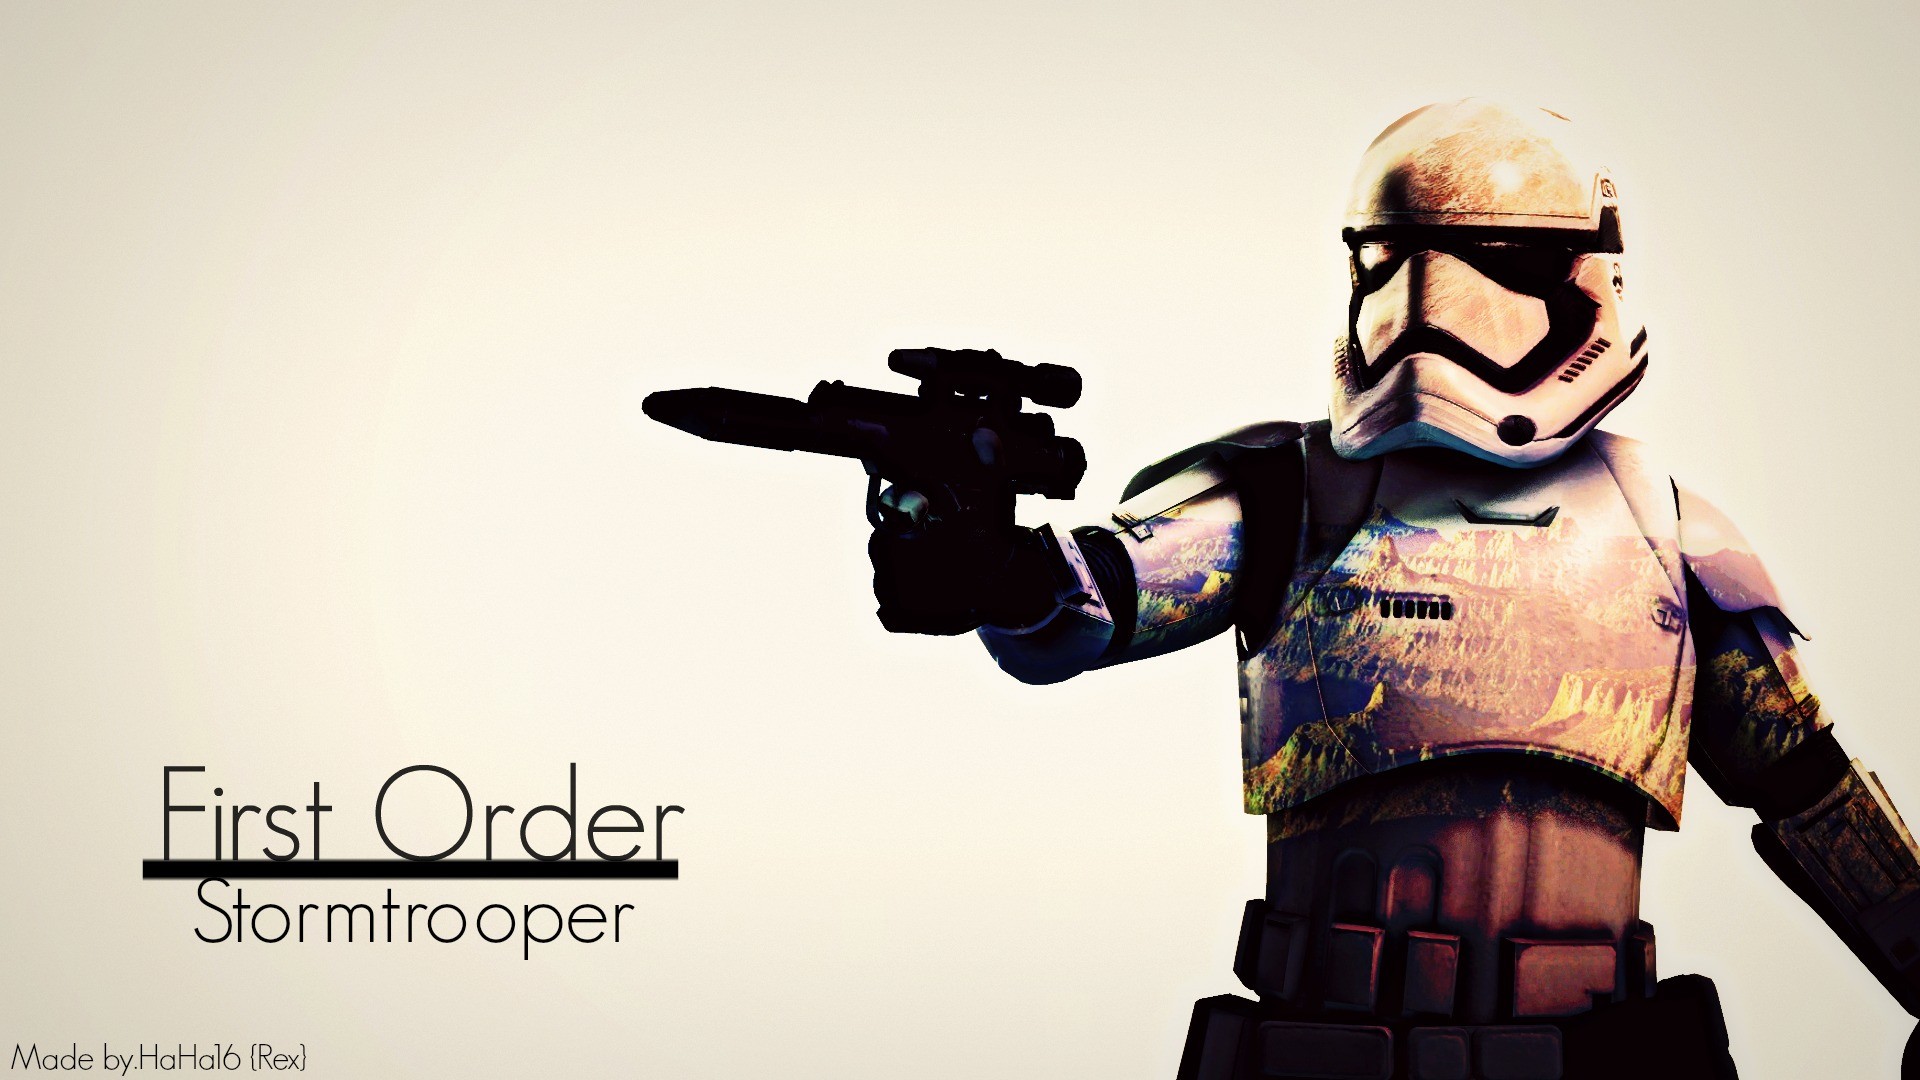 First Order Stormtrooper by HaHa16RexMaker First Order Stormtrooper by  HaHa16RexMaker